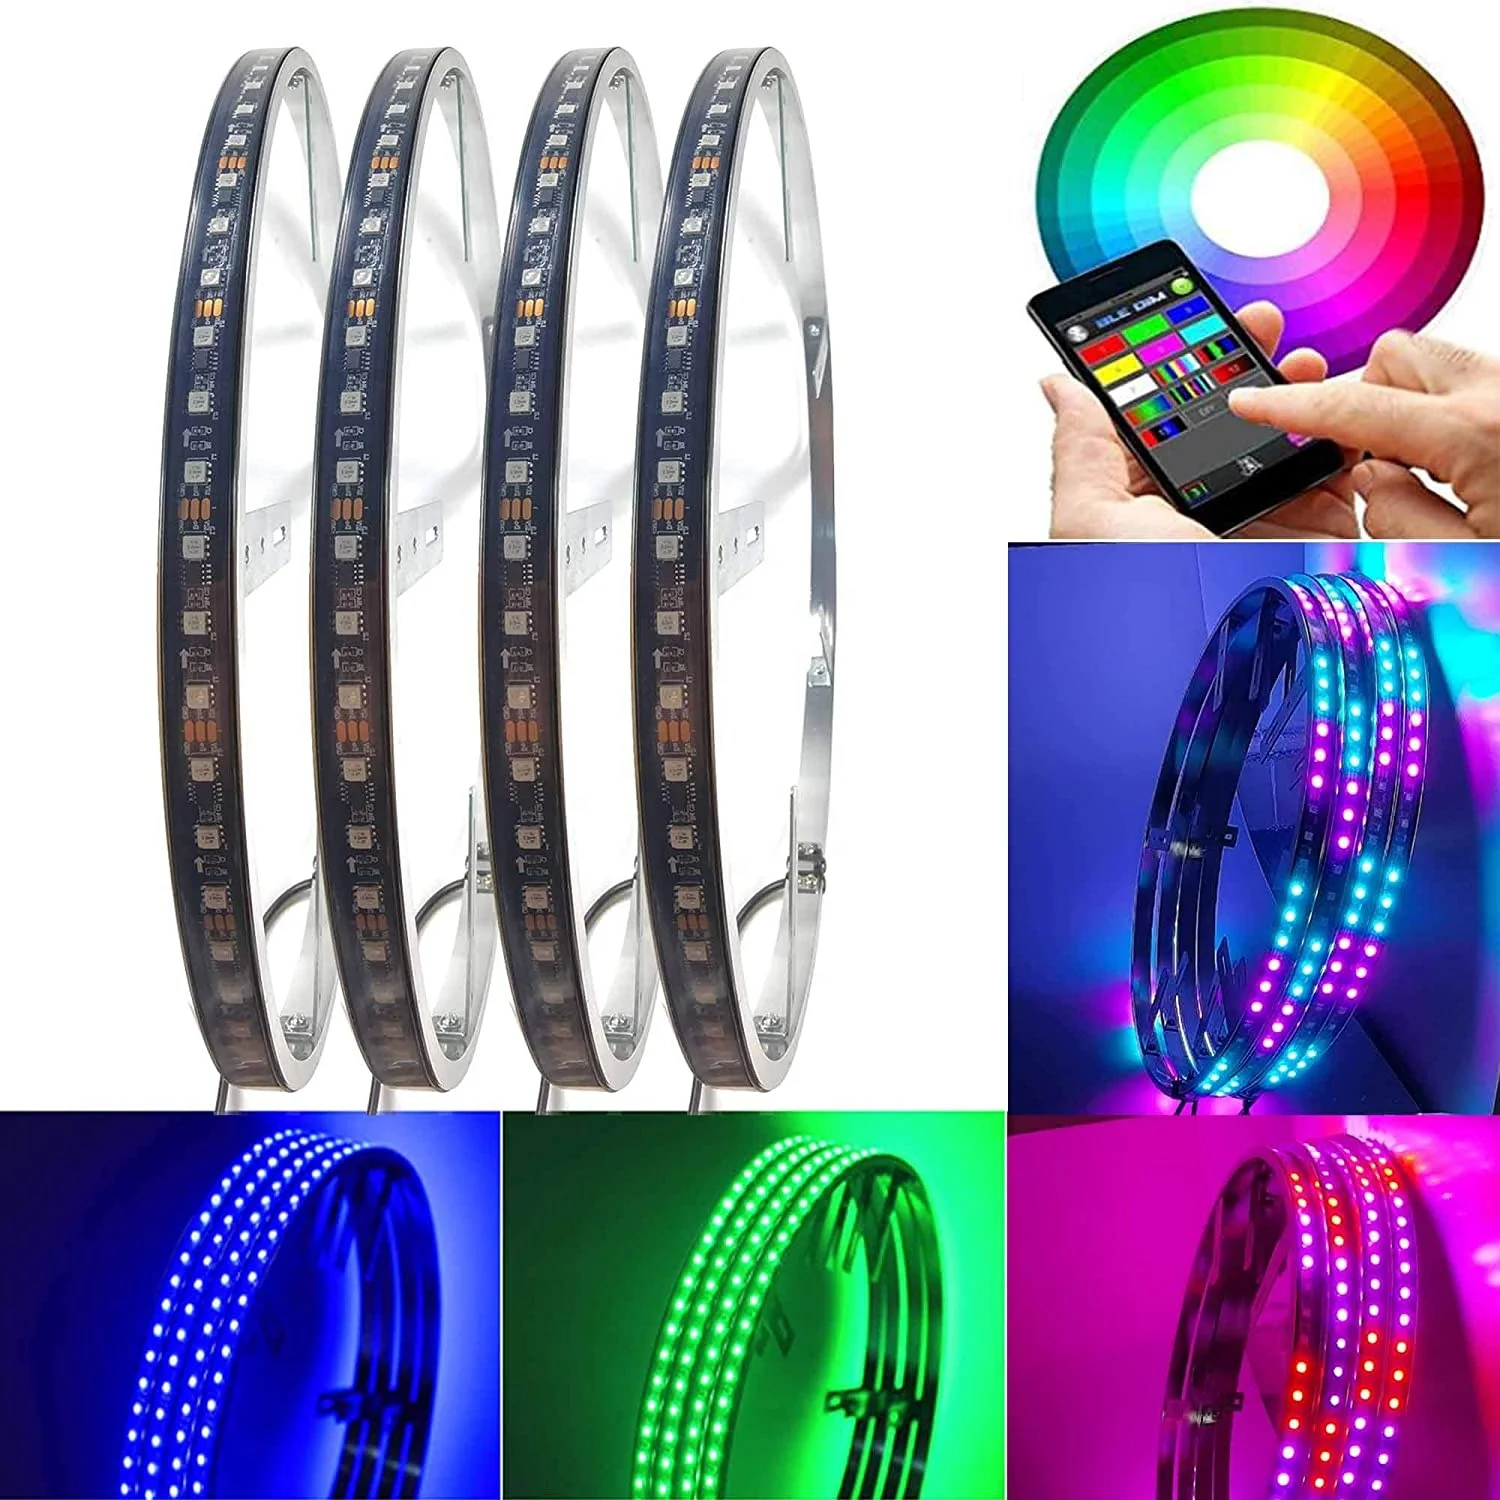 Blue-Tooth App Controlled Dream Chasing Colors Flow 15.5 LED Wheel Ring Lights Rim Lights Tire Lights